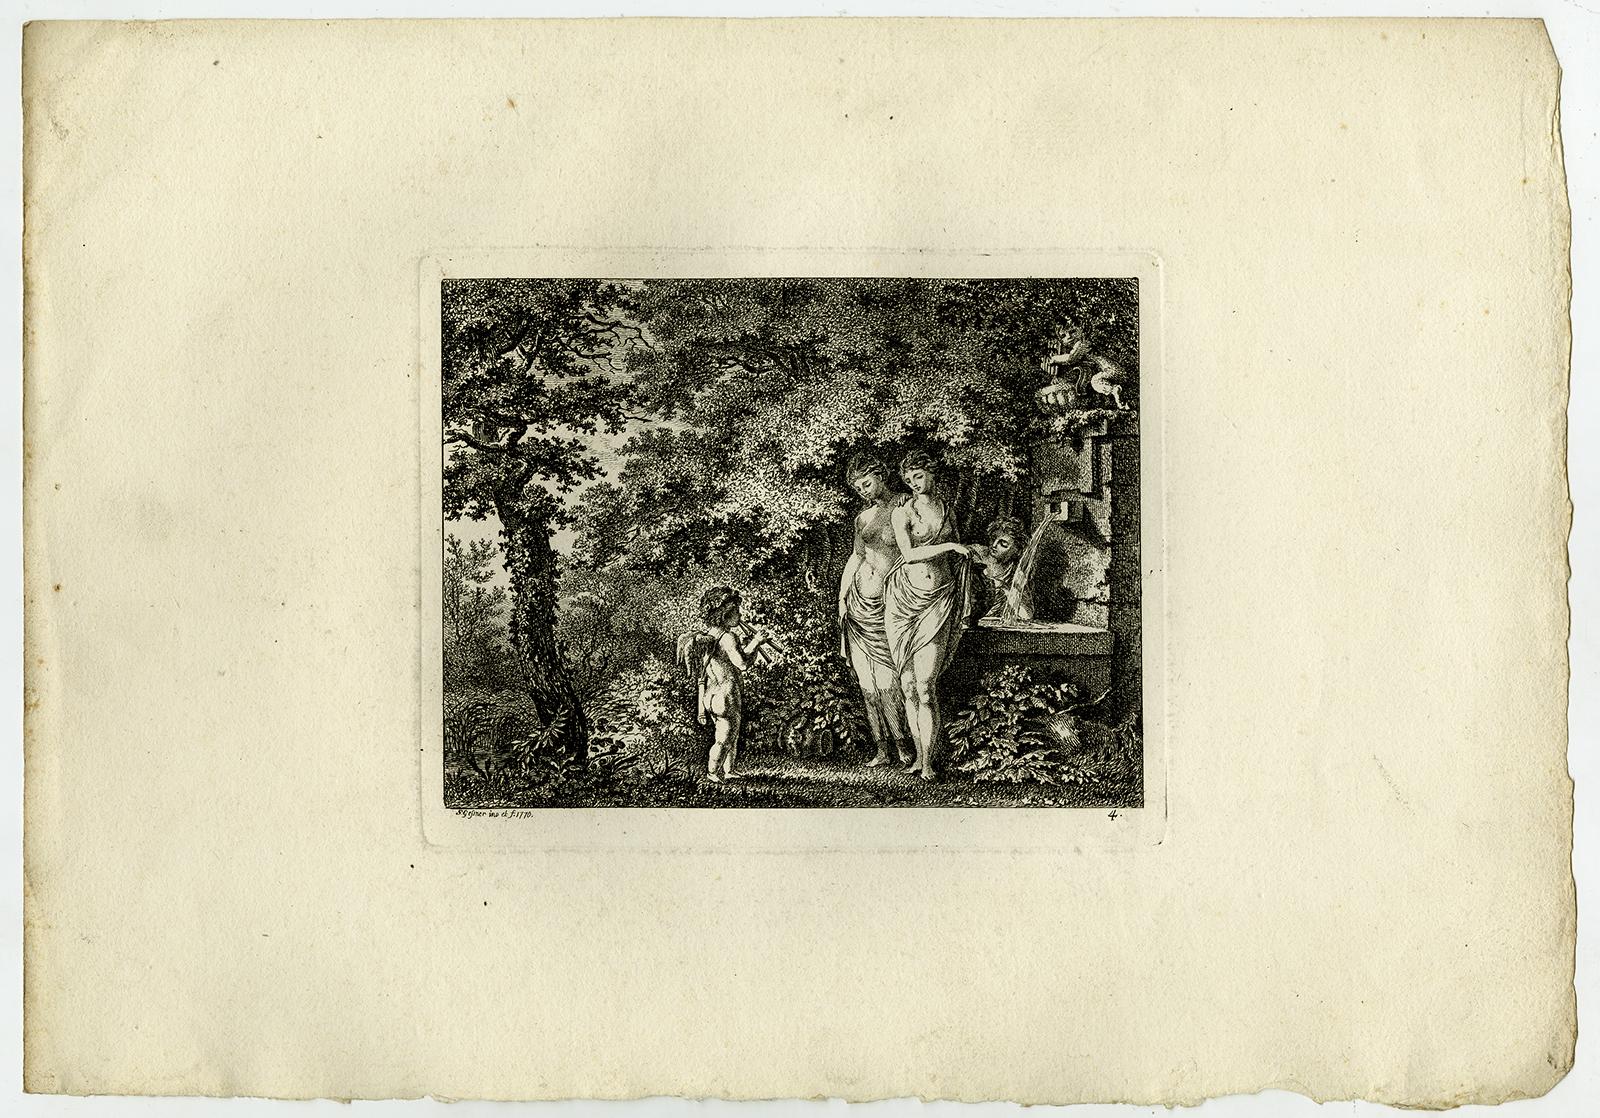 Subject:  Antique Master Print, untitled.  - Landscape with a putto playing flute to three women near a fountain.

Description:  From a set with landscapes in the 'antique' taste. . Ref: L/E 28.

Artists and Engravers:  Made by 'Salomon Gessner'